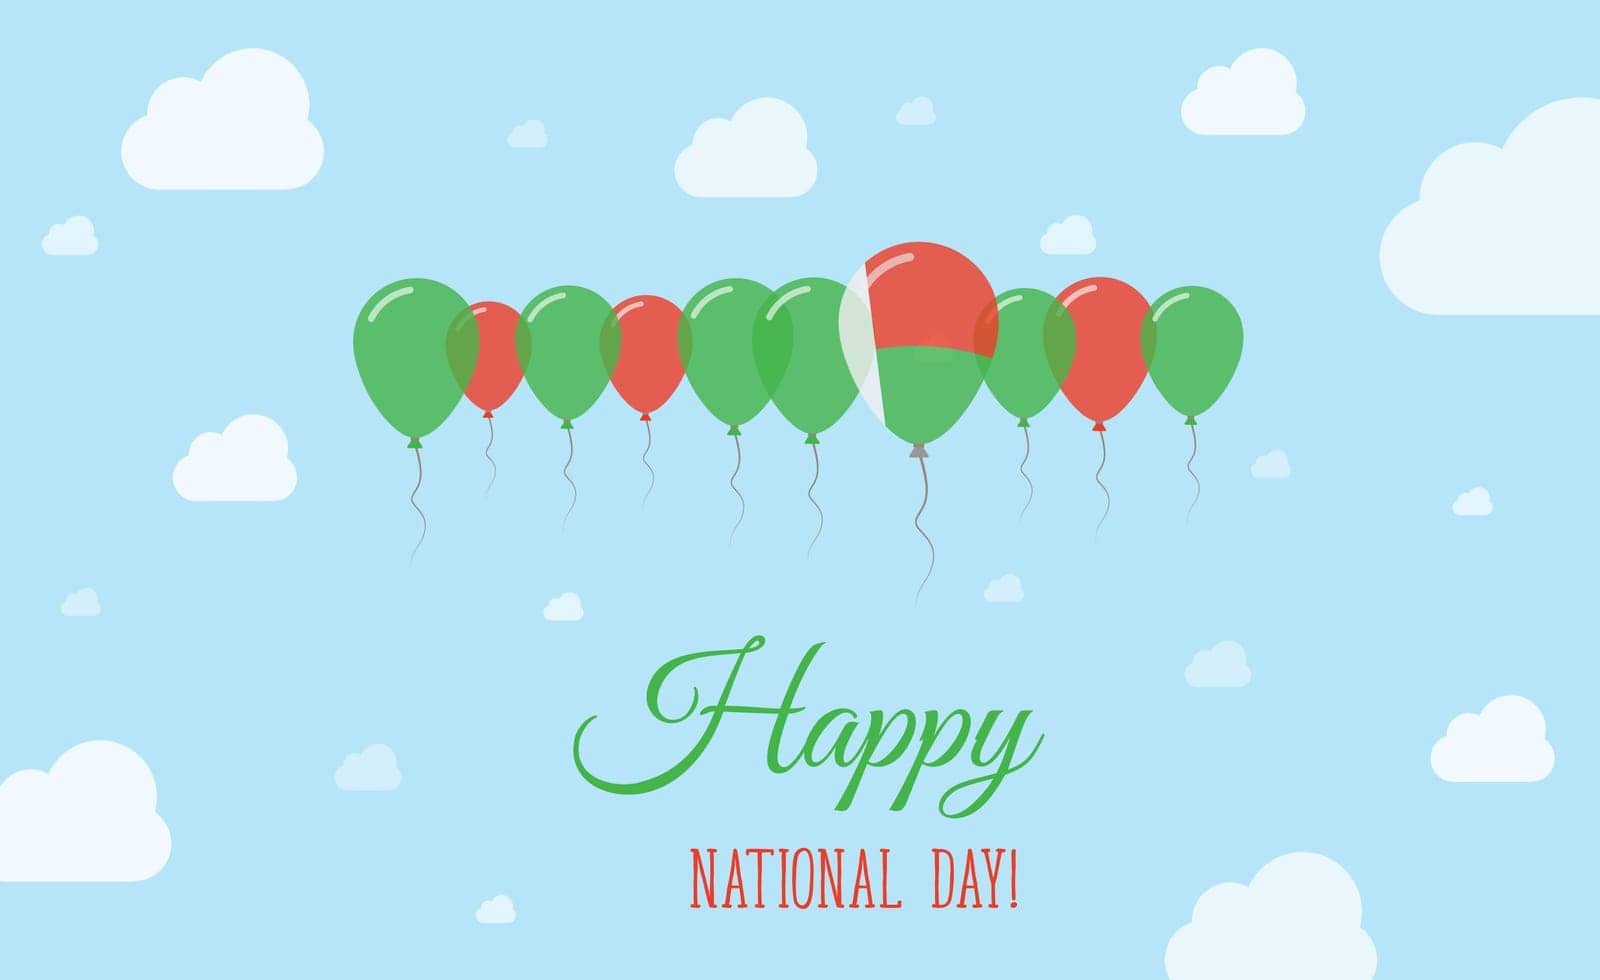 Madagascar Independence Day Sparkling Patriotic Poster. Row of Balloons in Colors of the Malagasy Flag. Greeting Card with National Flags, Blue Skyes and Clouds.